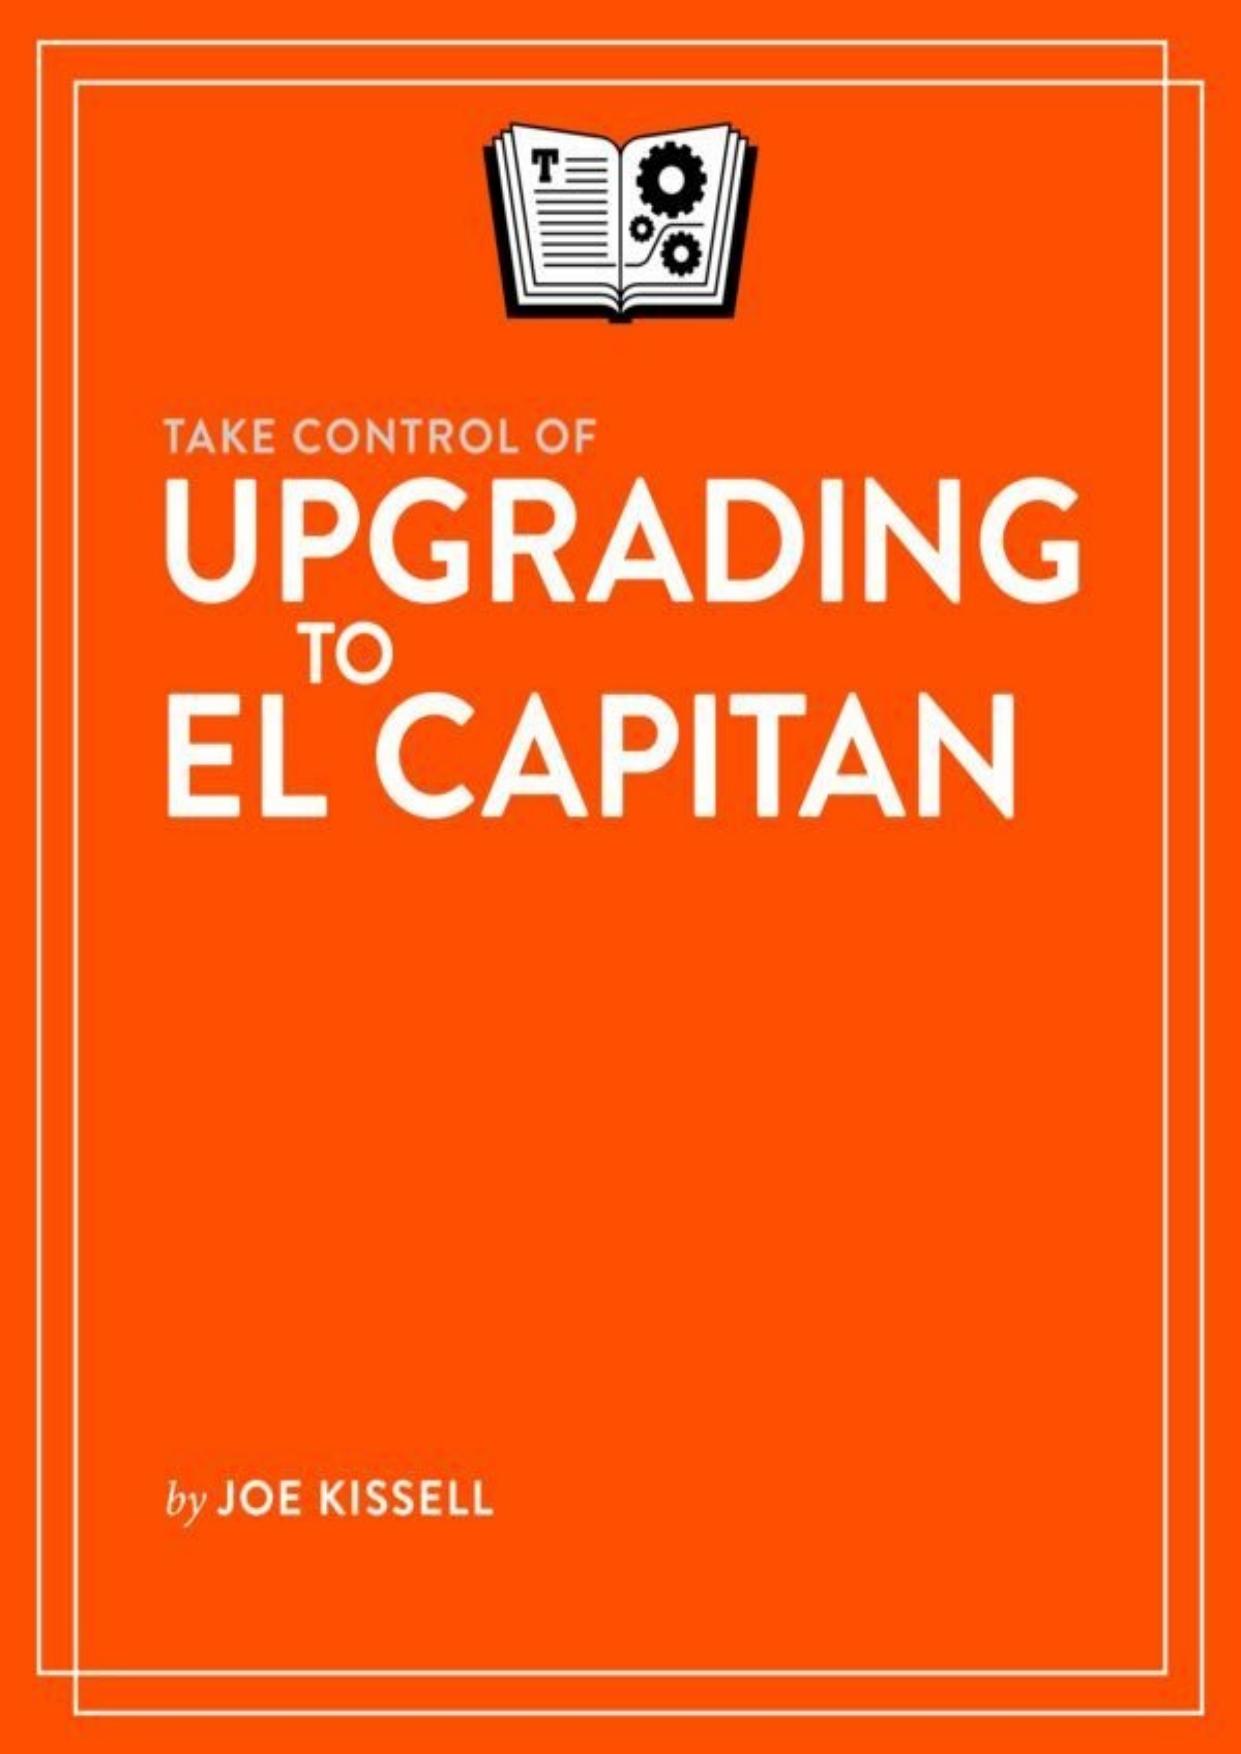 Take Control of Upgrading to El Capitan by Joe Kissell